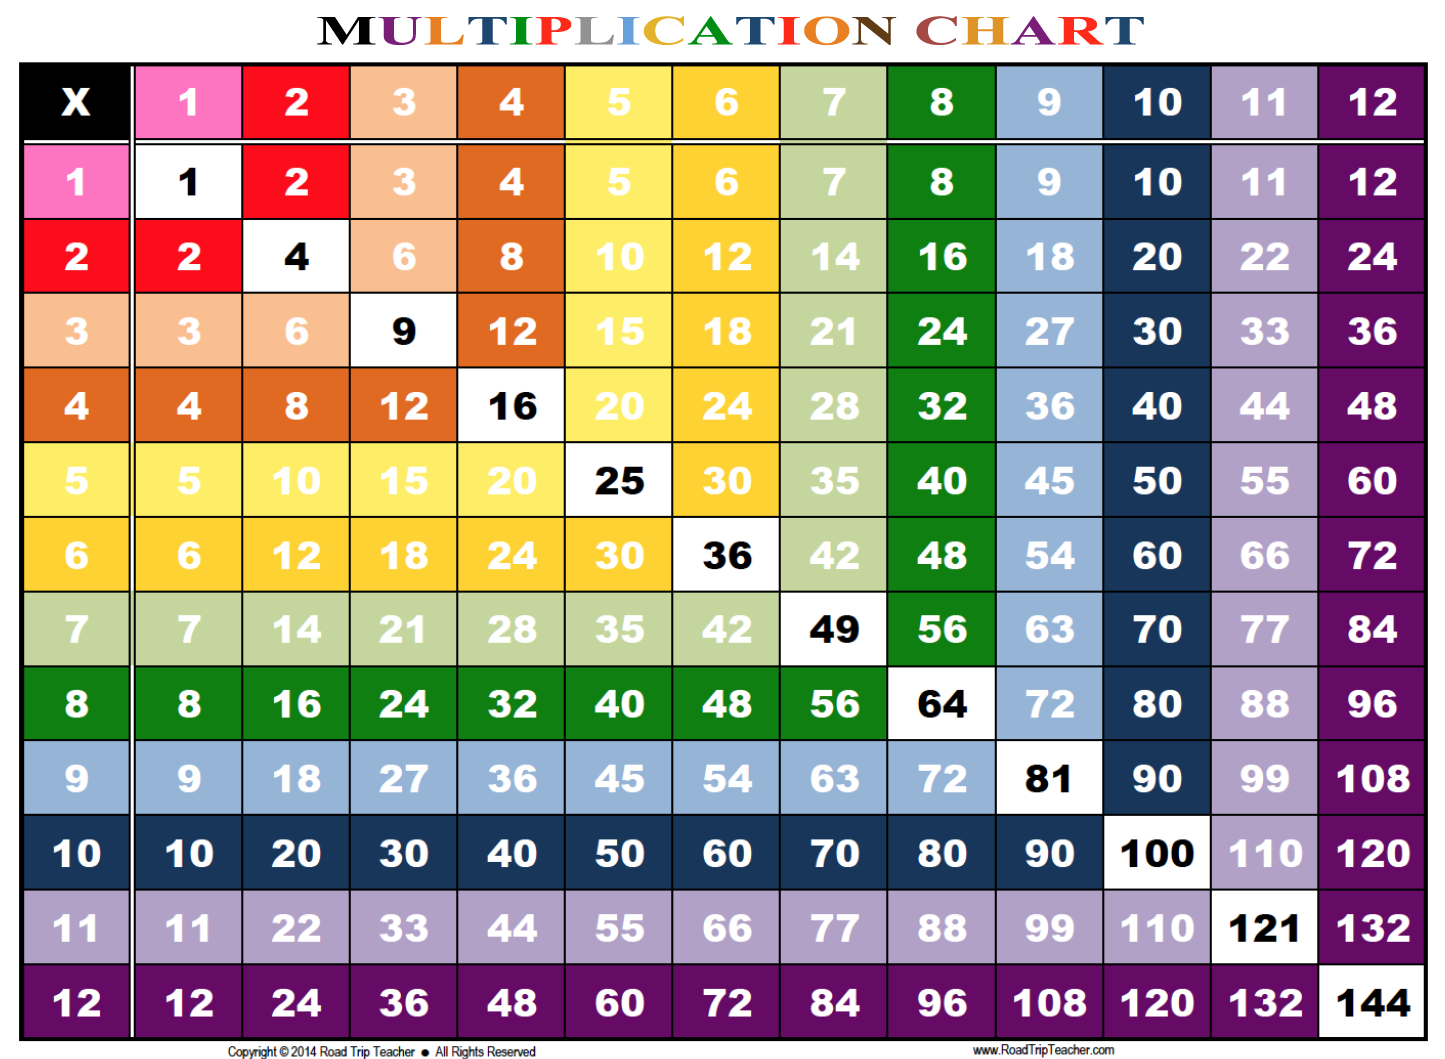 Rainbow Multiplication Chart - Family Educational Resources